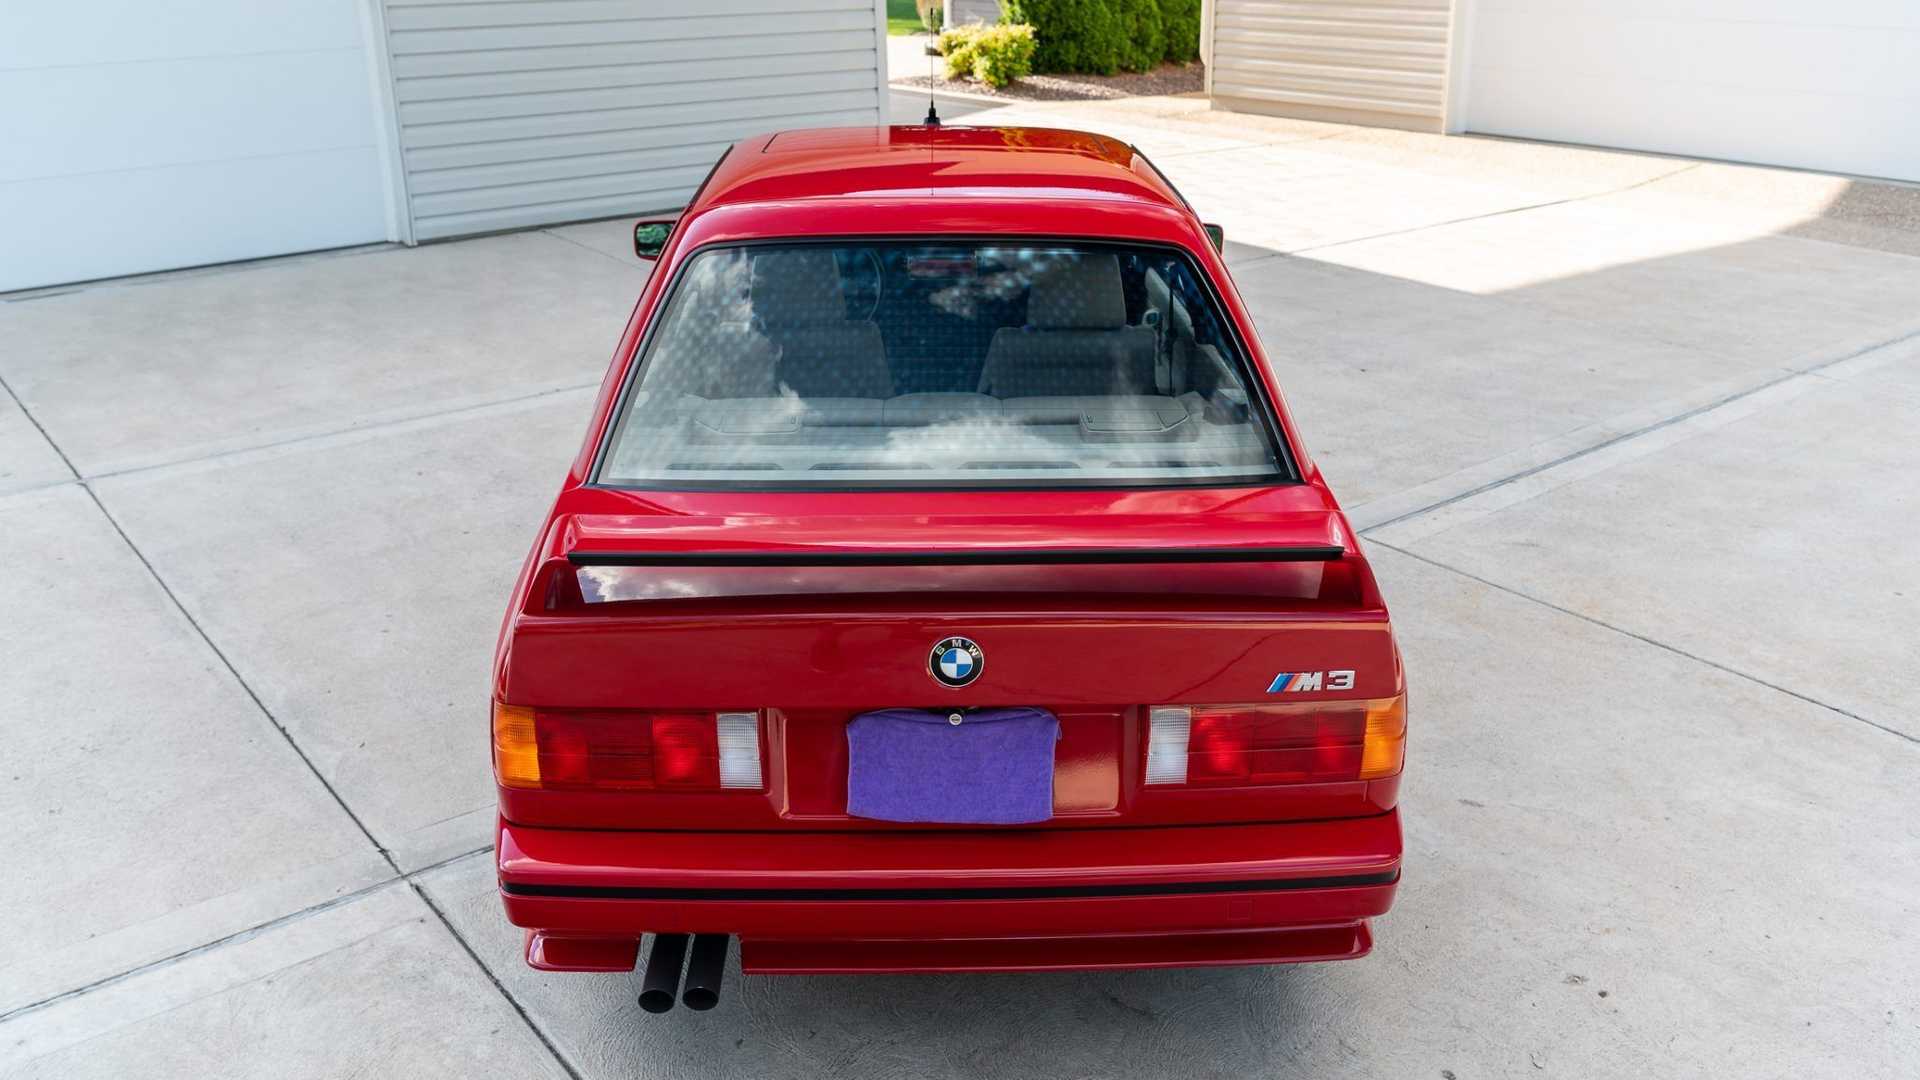 1988 E30 BMW M3 Sold for Whopping $250,000 on Bring A Trailer -  autoevolution